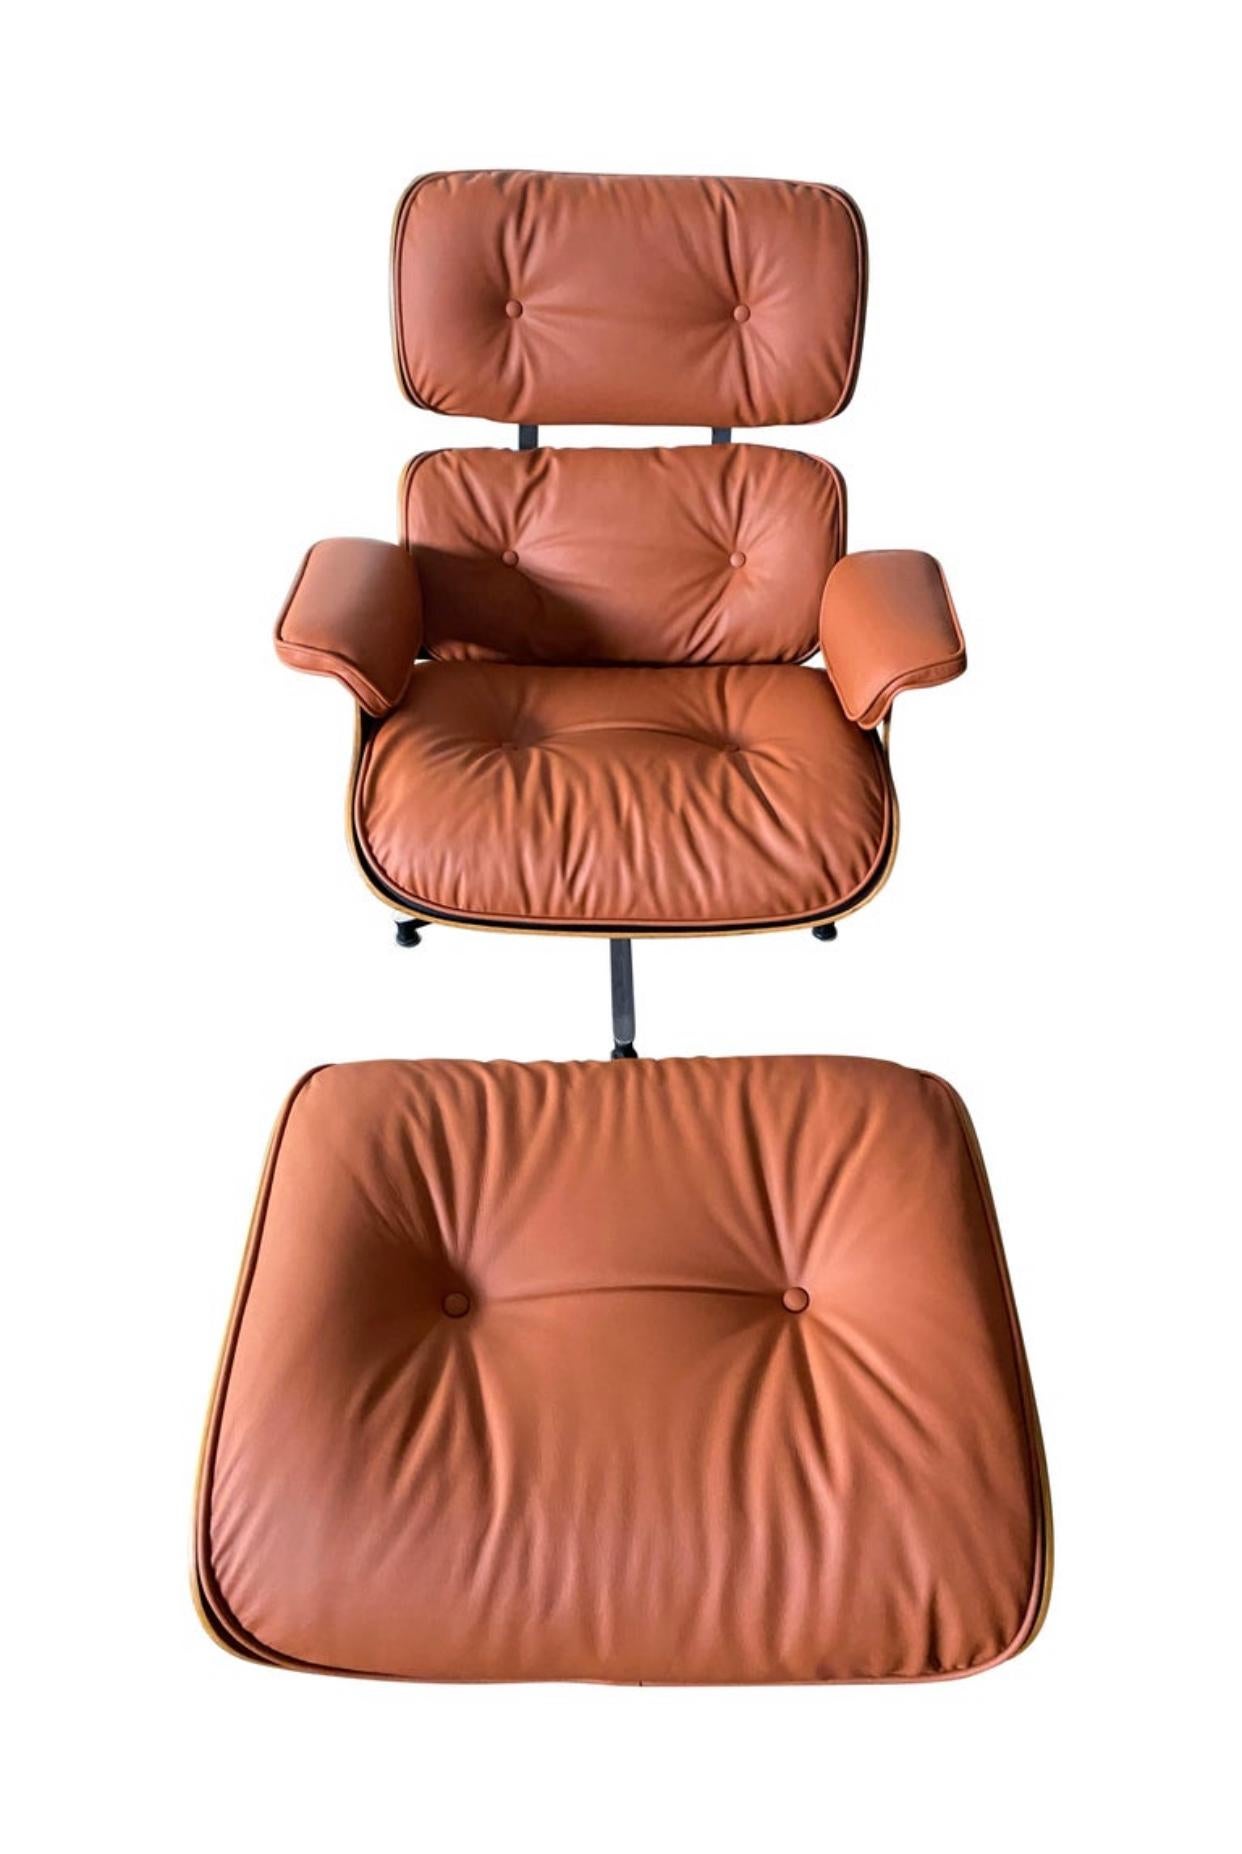 American Eames Lounge Chair and Ottoman in Burnt Orange